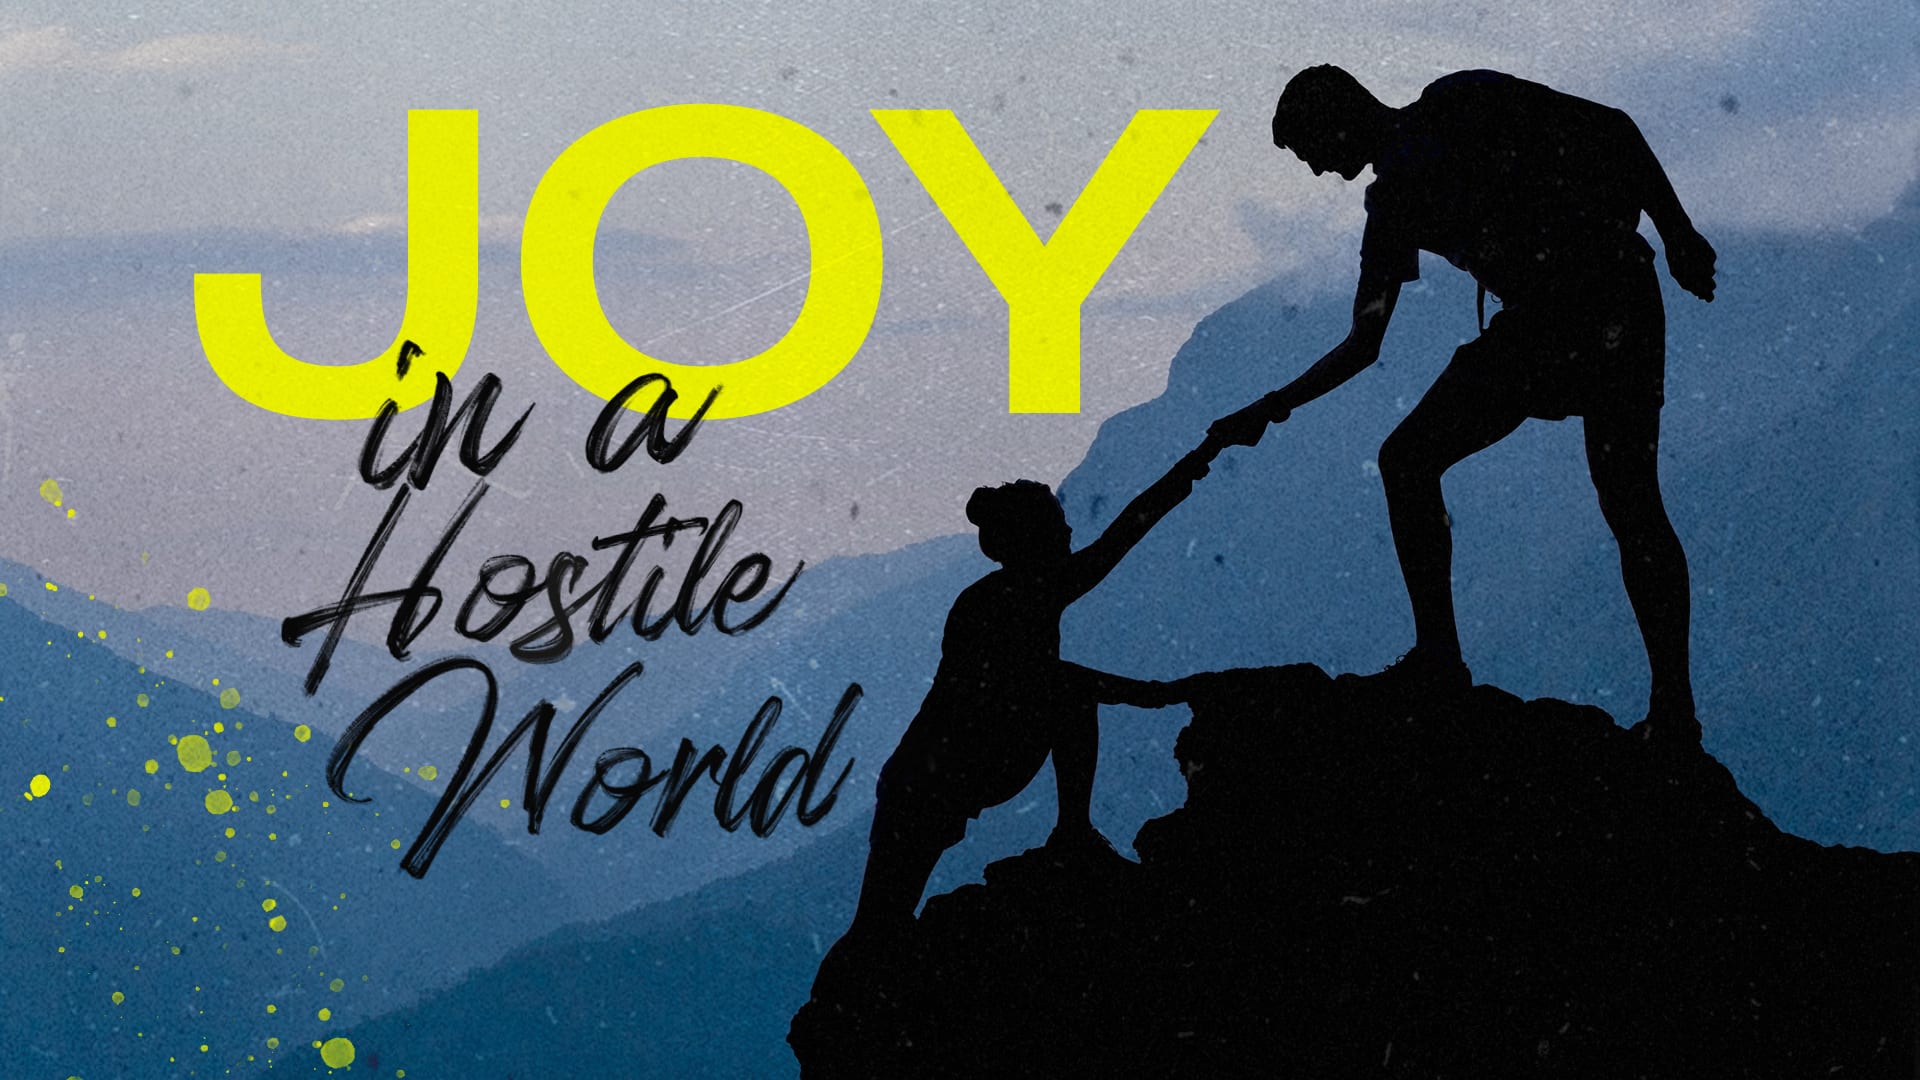 Joy in a hostile world - outline of a man helping a woman up a rock face.